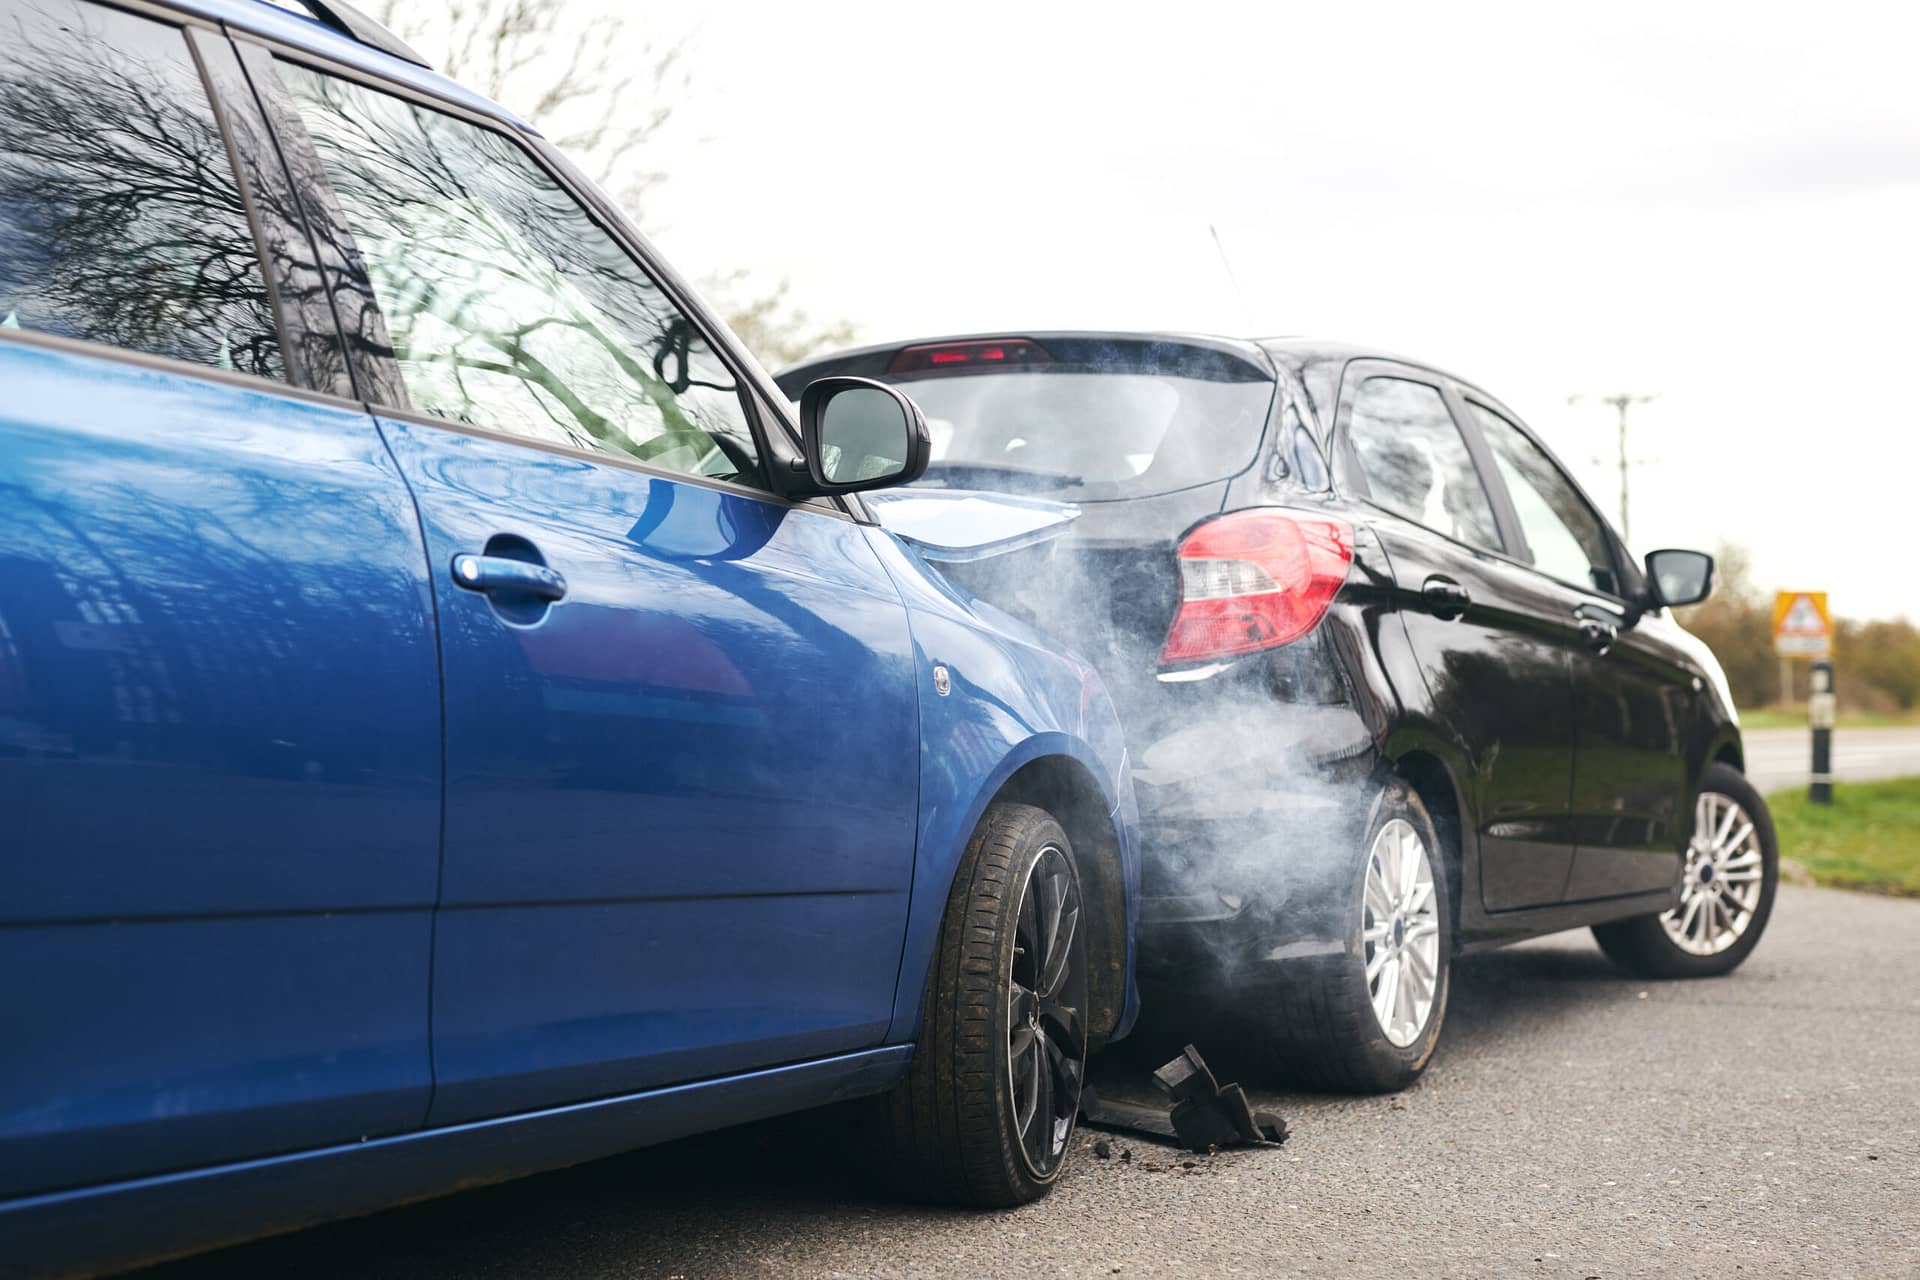 Why Do Rear-End Collisions Happen and Who’s To Blame?